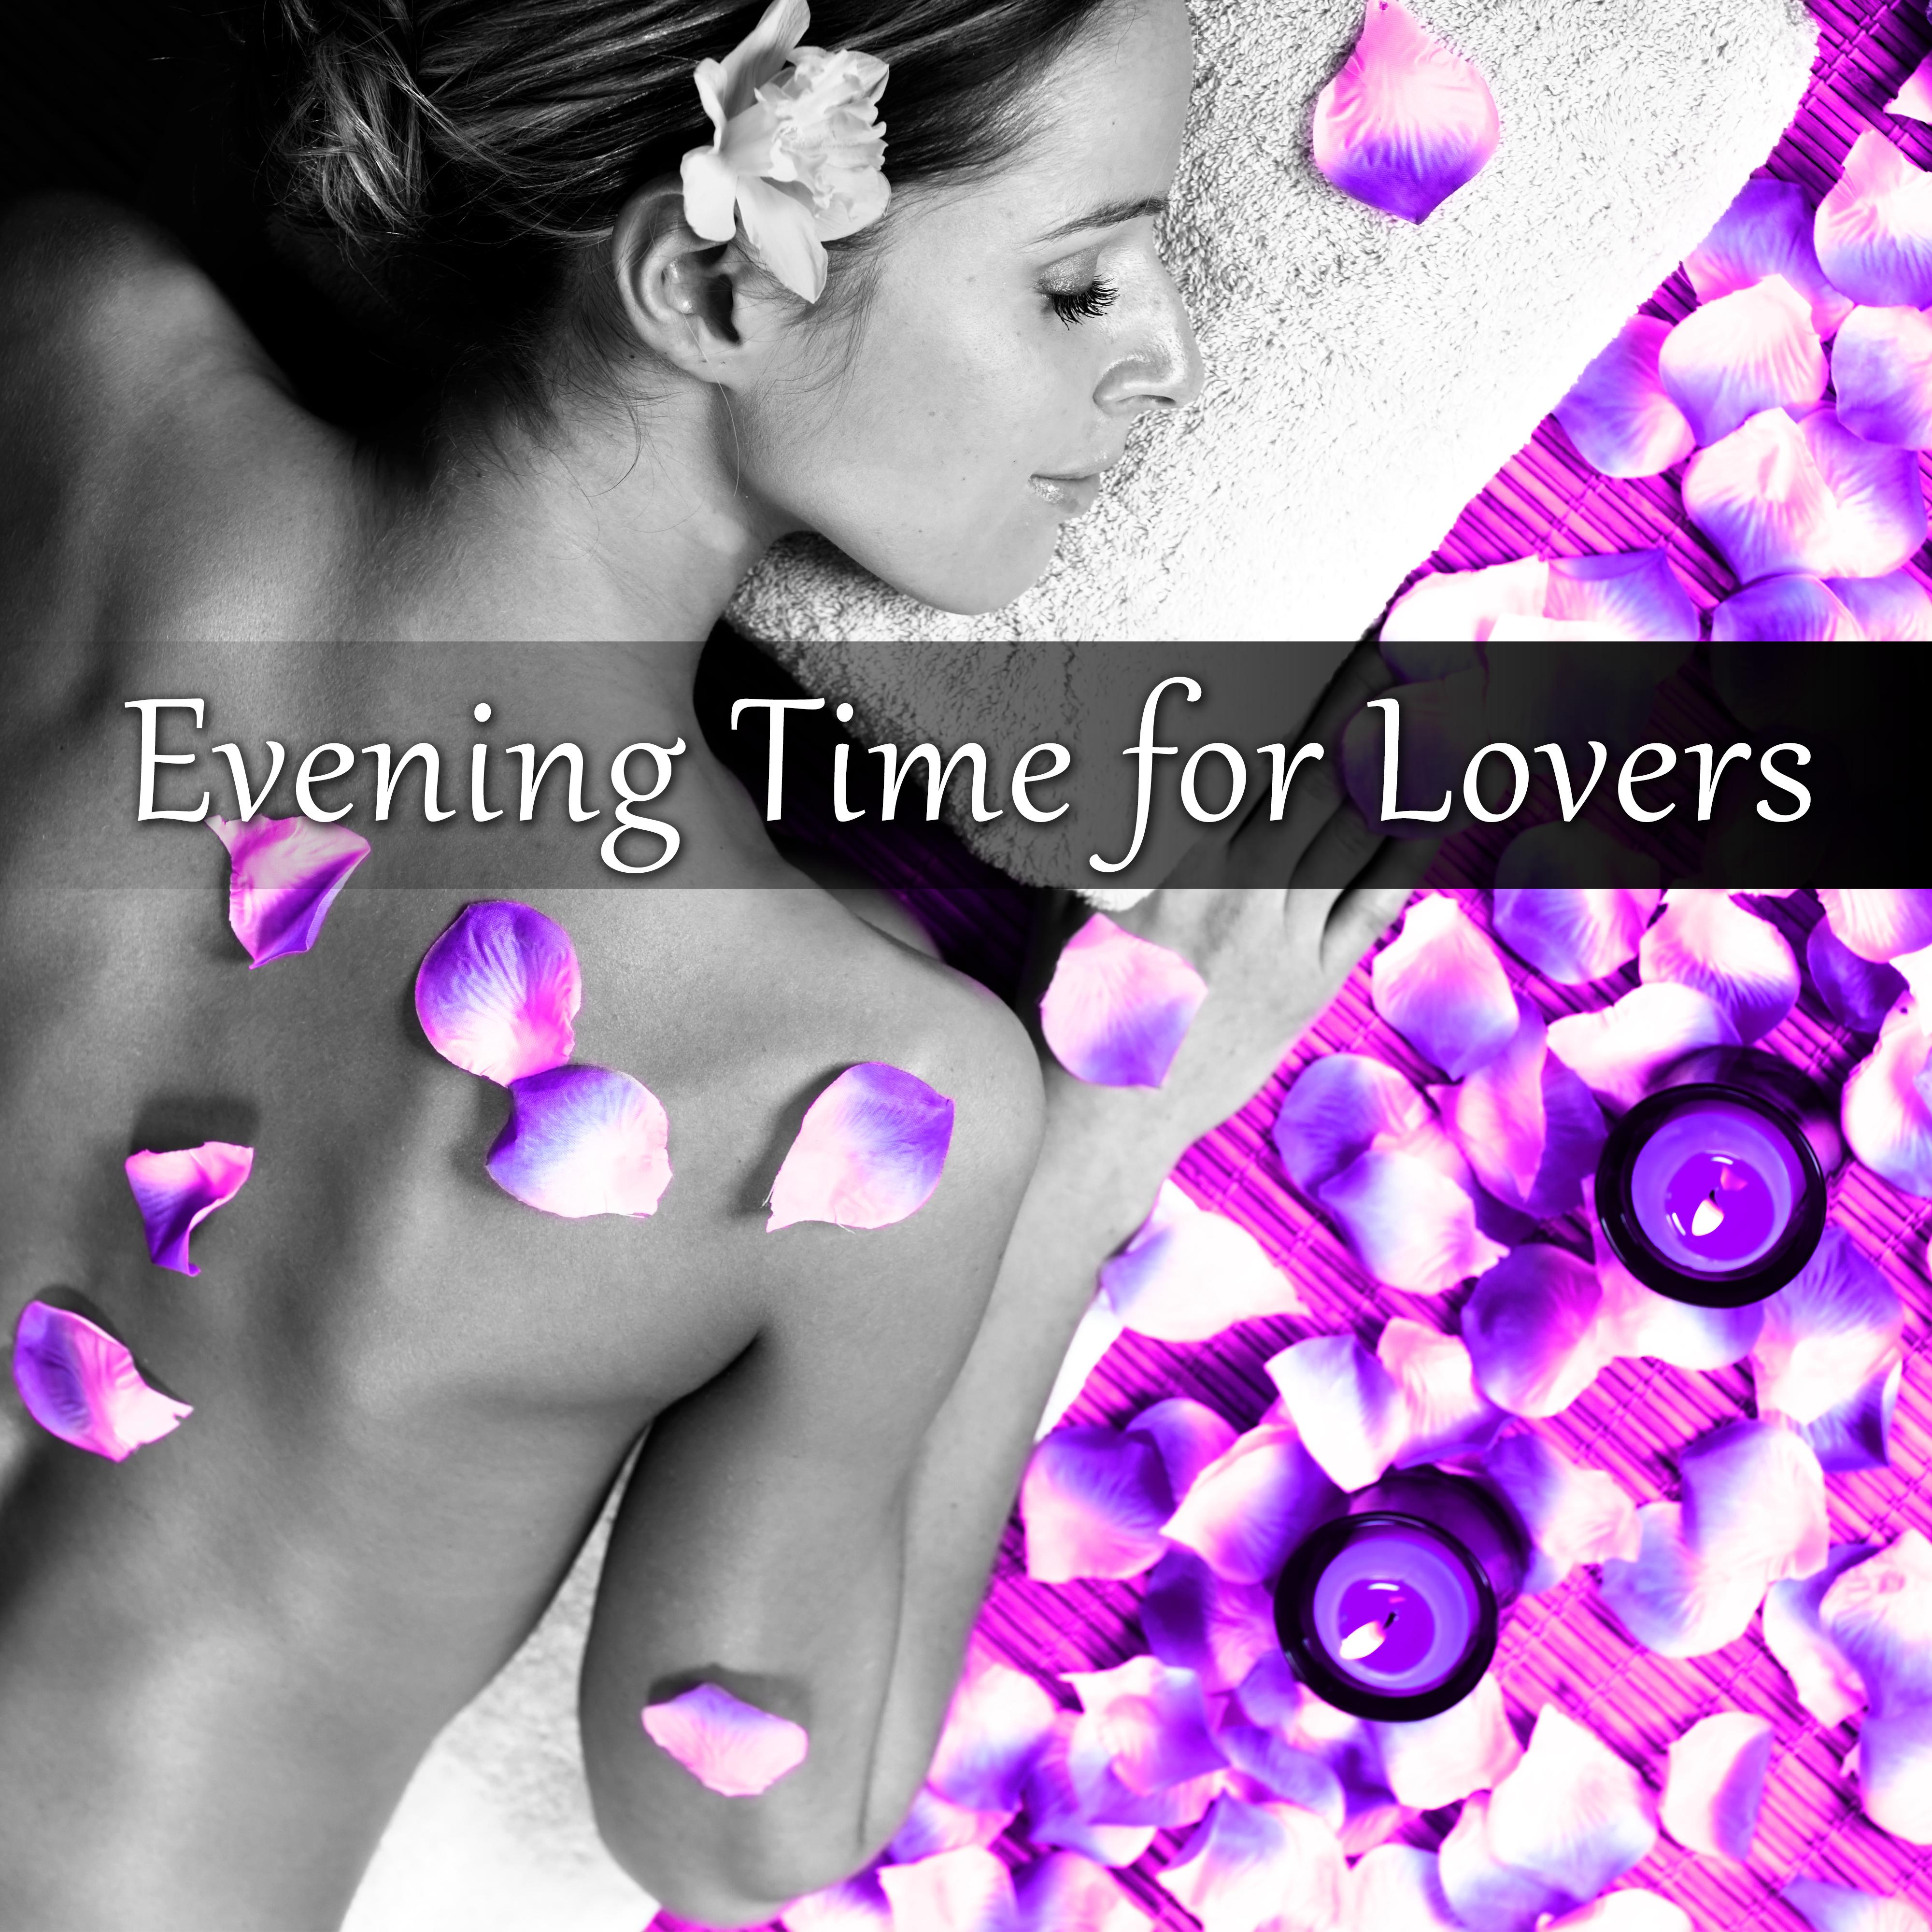 Evening Time for Lovers - Romantic Music, Shades of Love, Background Piano, **** Songs, Intimate Moments, Coktail Piano Bar